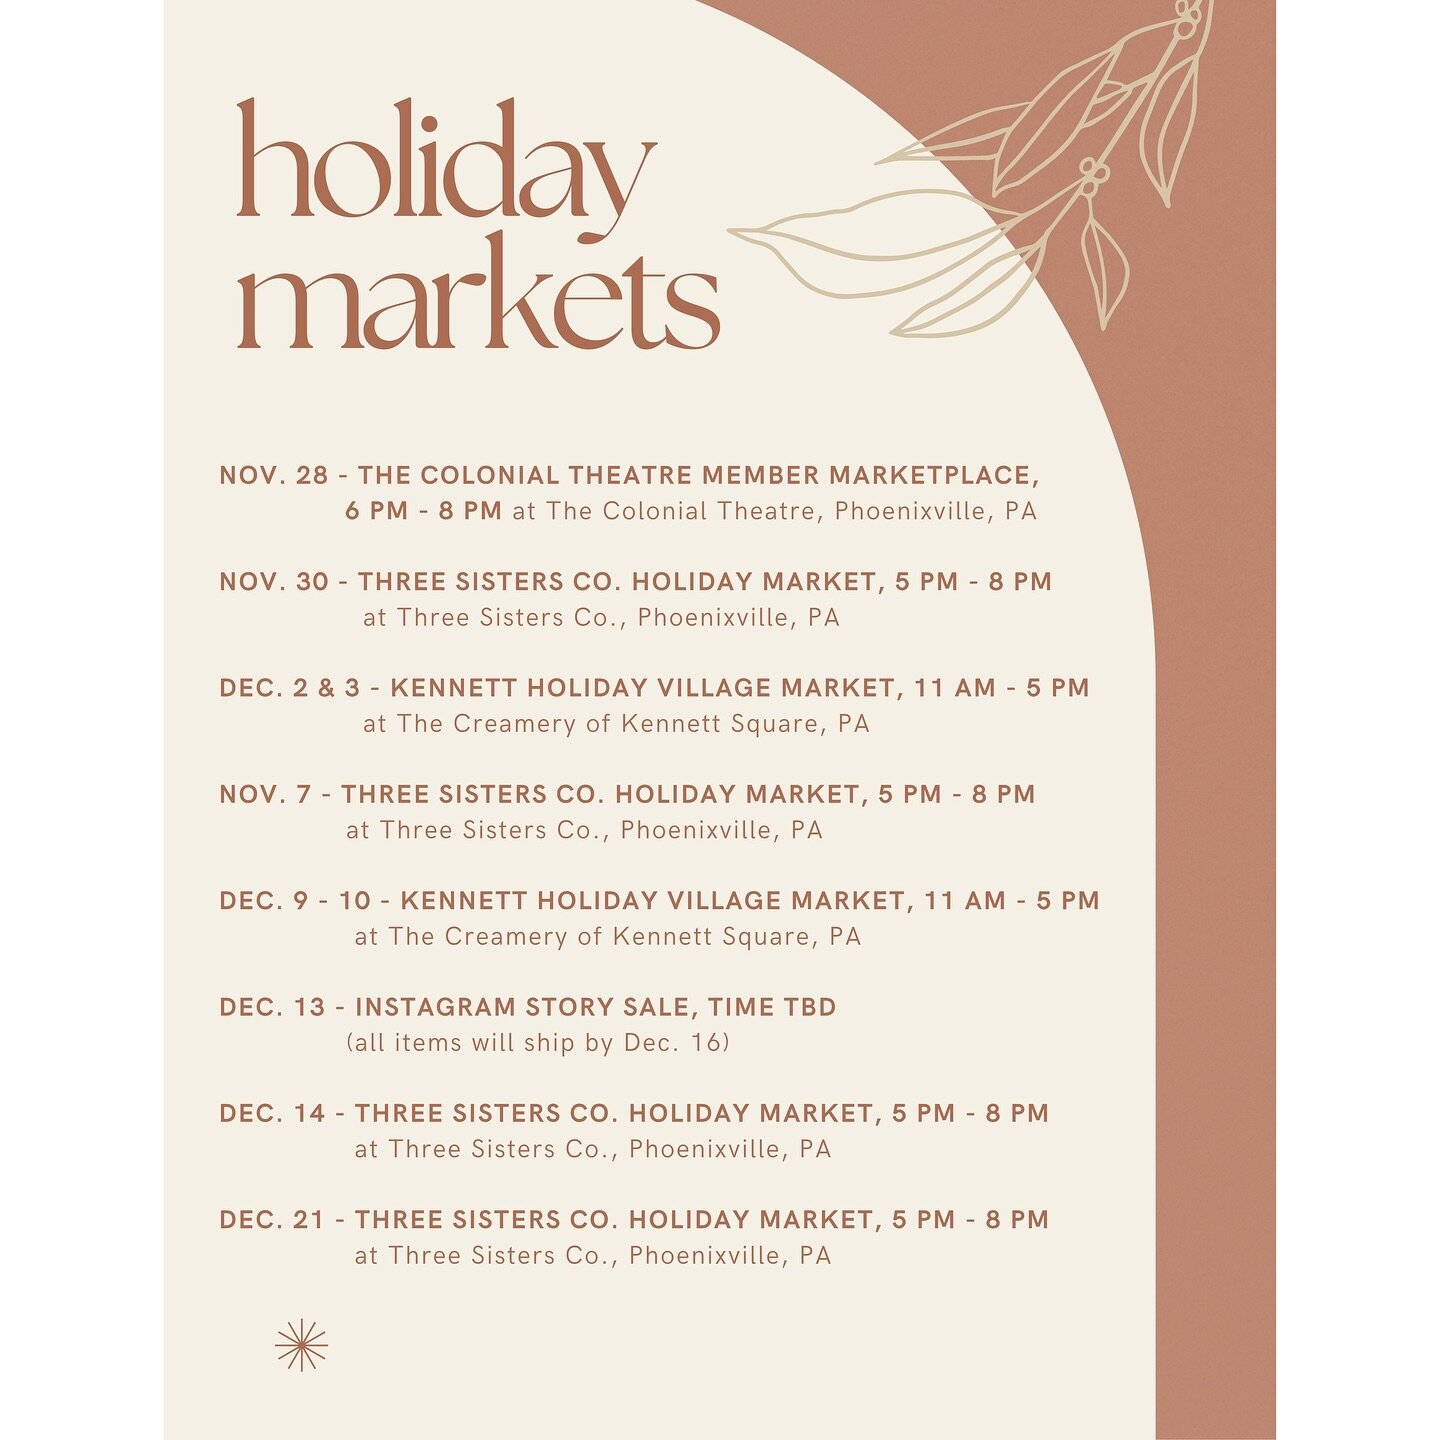 I am gearing up for an exciting string of holiday markets ahead! I'm looking forward to returning to @kennettholidayvillagemarket the first two weekends of December and taking part in two new markets- the first ever Member Marketplace at @thecolonial